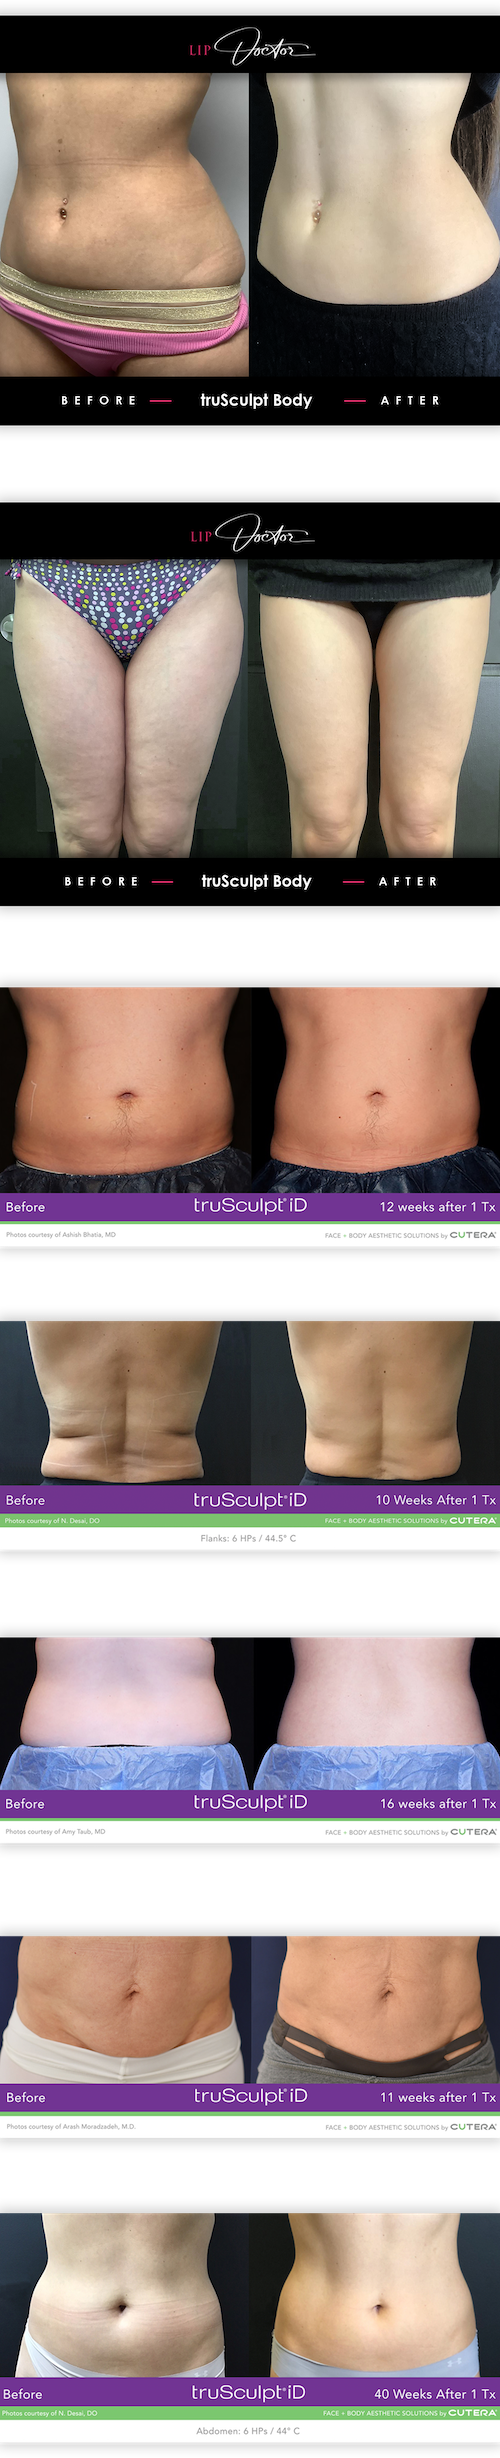 before after trusculpt mobile